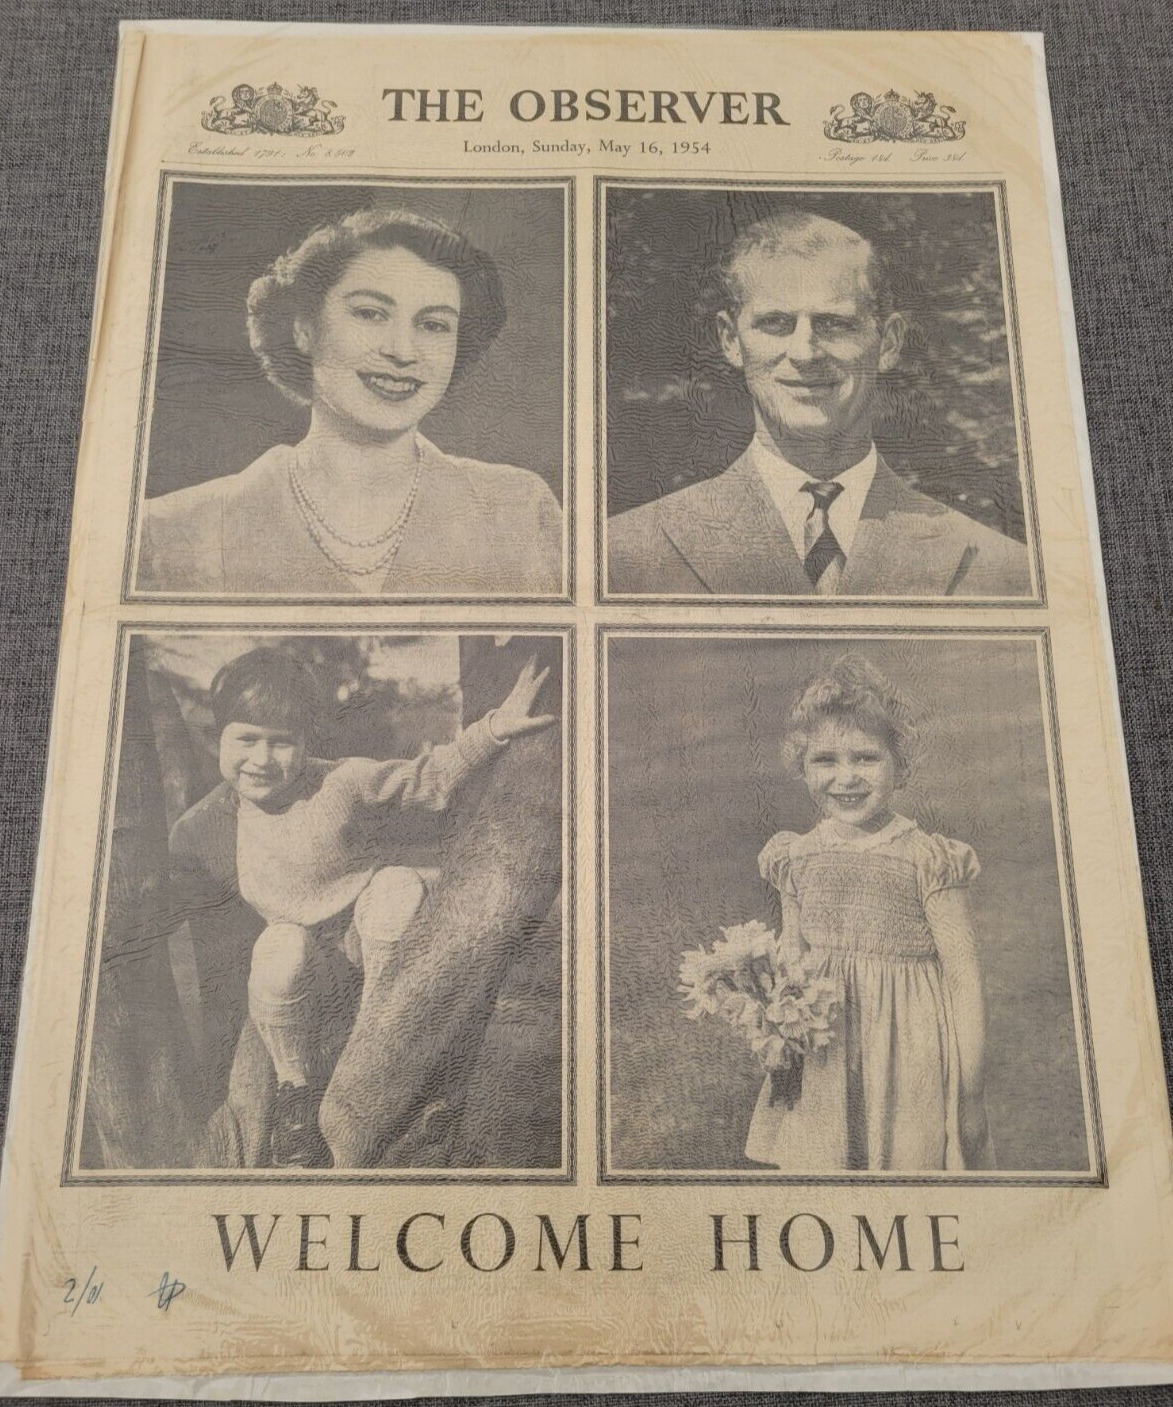 THE OBSERVER ROYAL FAMILY WELCOME HOME QUEEN ELIZABETH II1 6 MAY 1954 NEWSPAPER